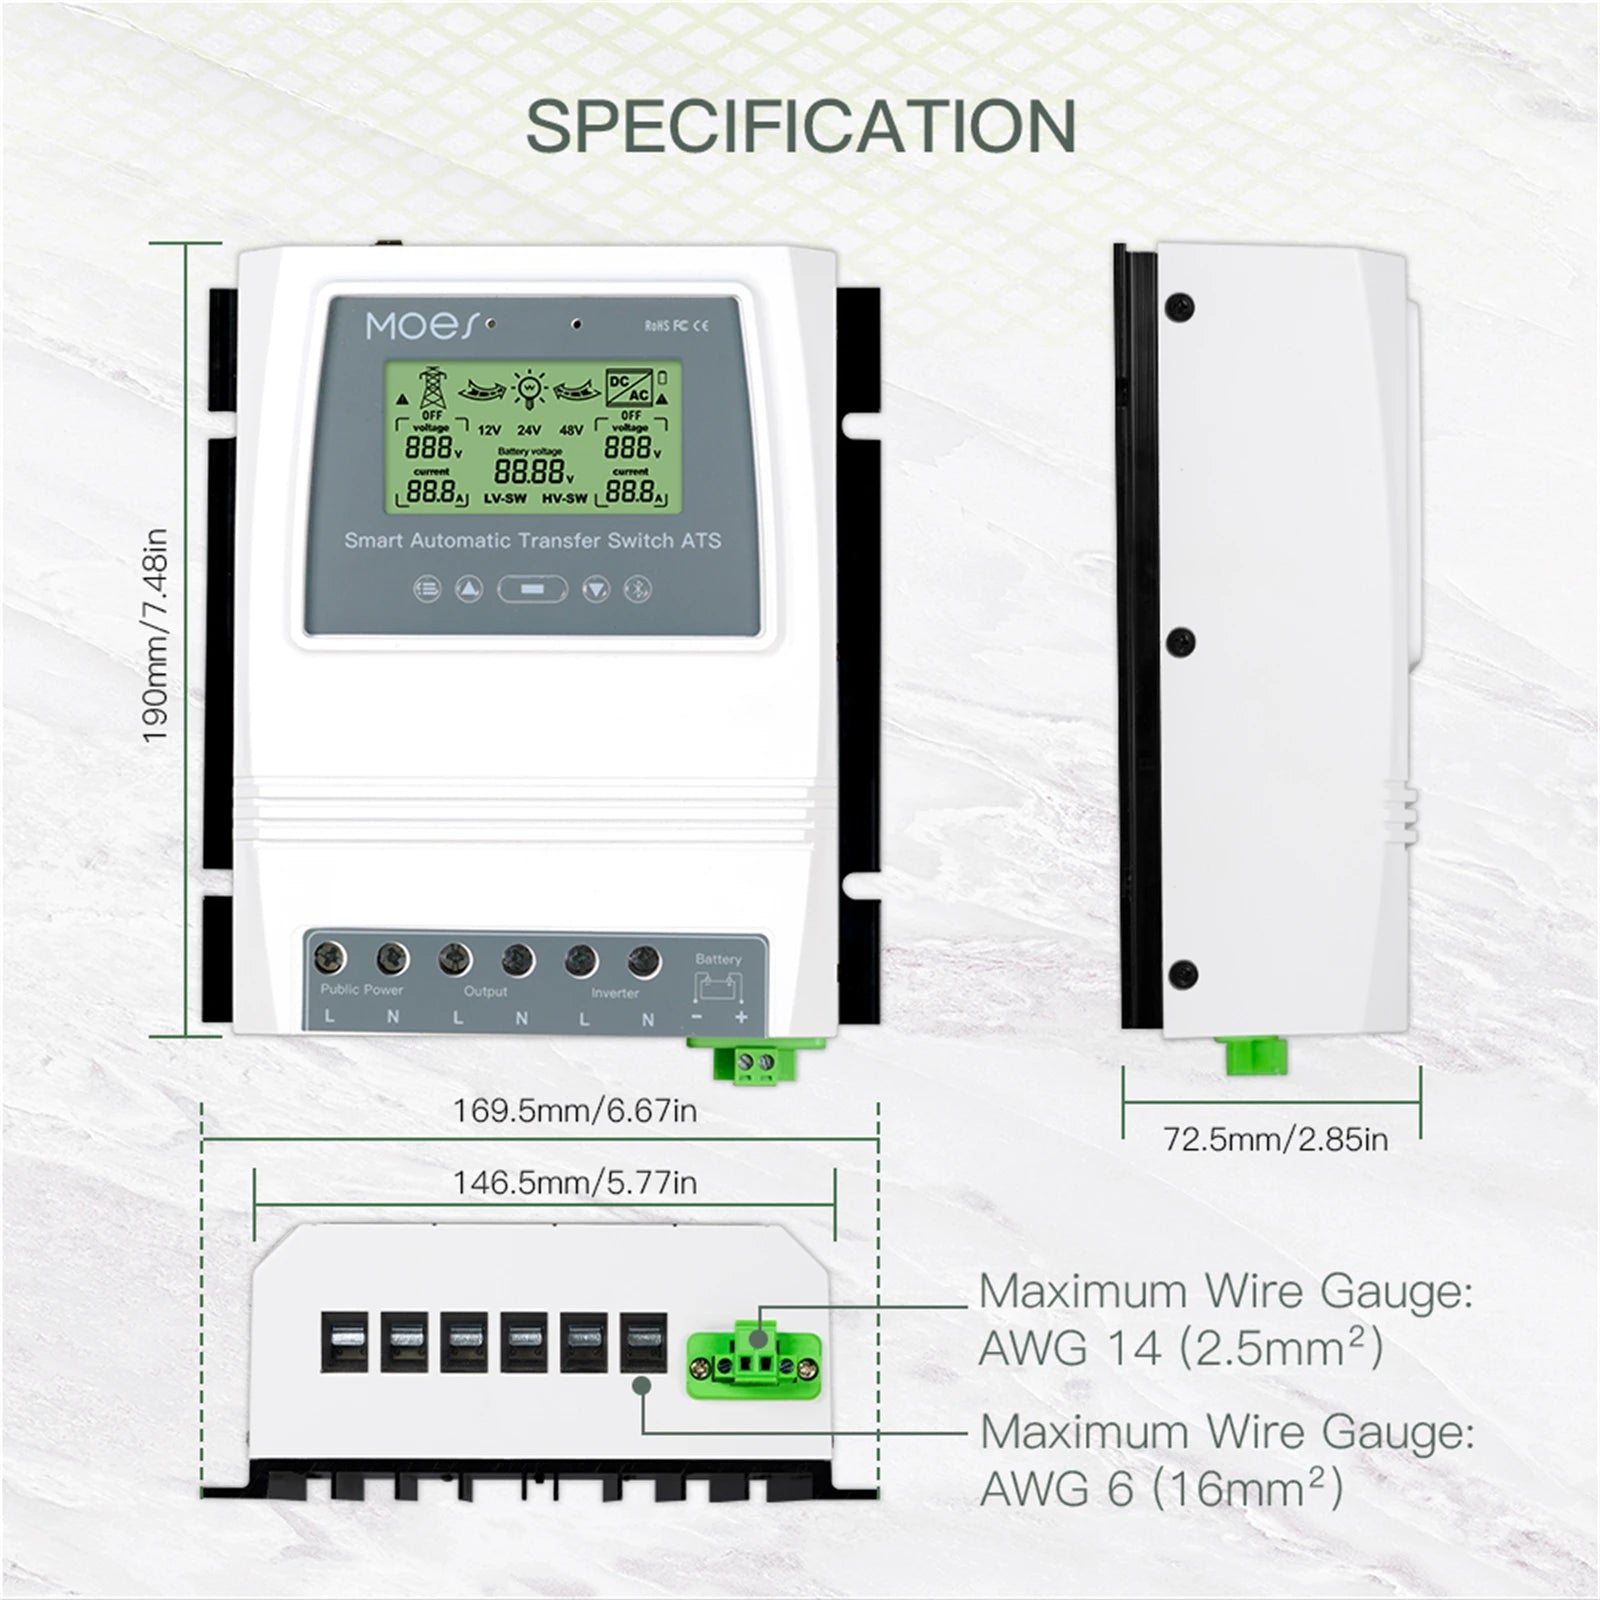 Automatic Transfer Switch (ATS) for DC/AC power, up to 6kW output, compact design.